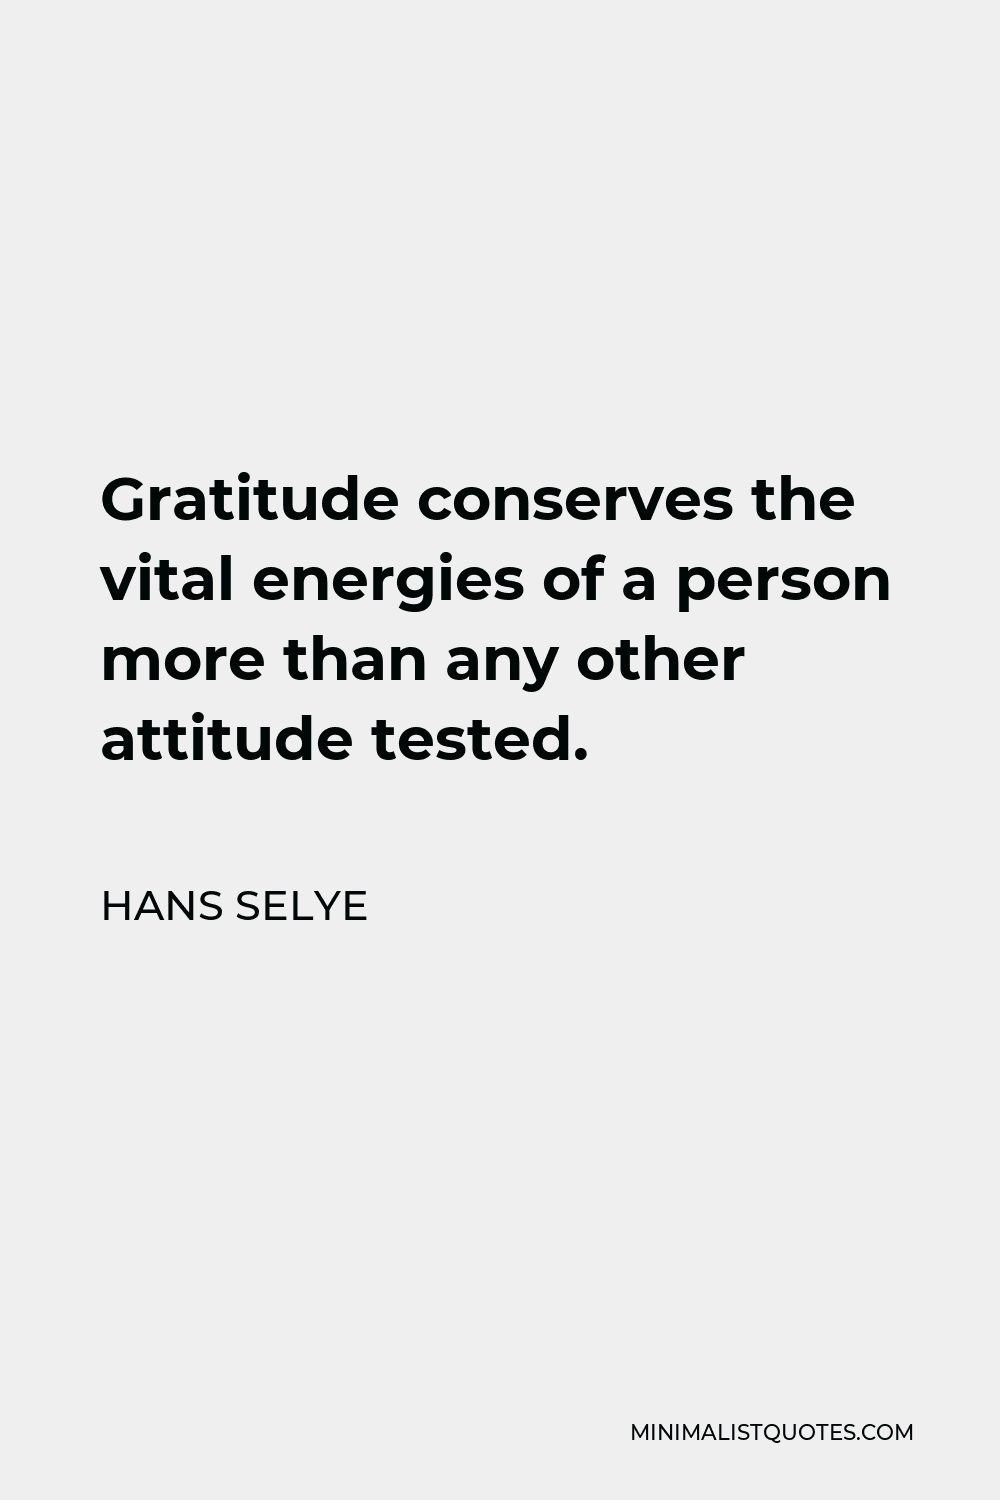 Hans Selye Quote - Gratitude conserves the vital energies of a person more than any other attitude tested.